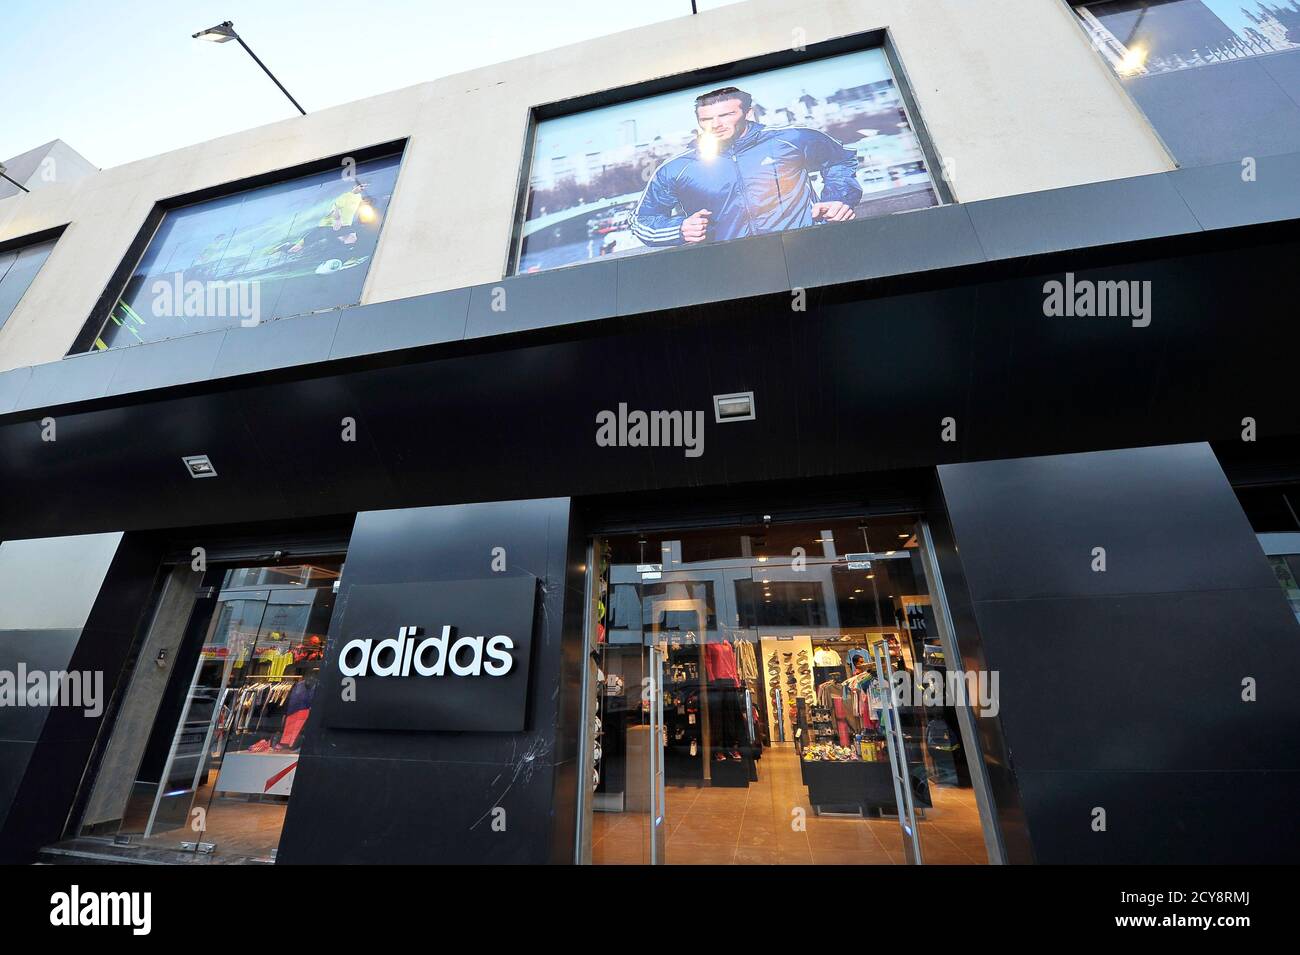 A view of an Adidas shop along Venice Street in Benghazi November 7, 2013.  Benghazi sits at the heart of an autonomy movement resisting central  government authority and taking over eastern ports